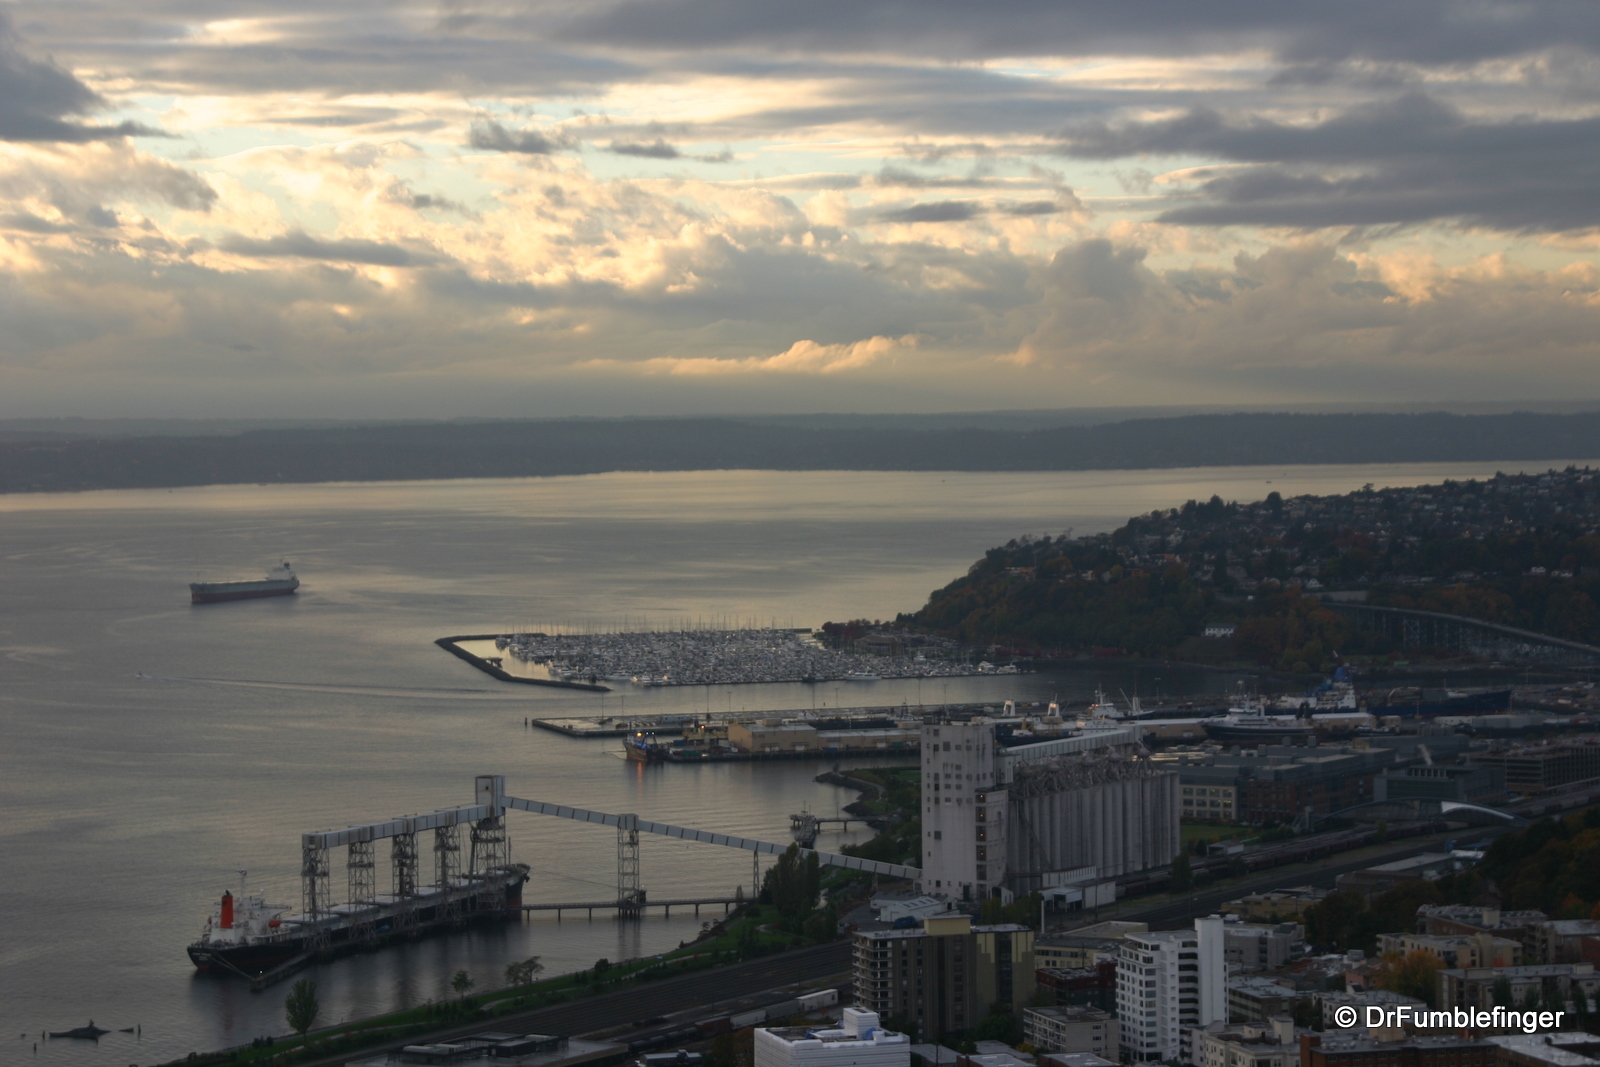 Seattle waterfront, viewed from Space Needle